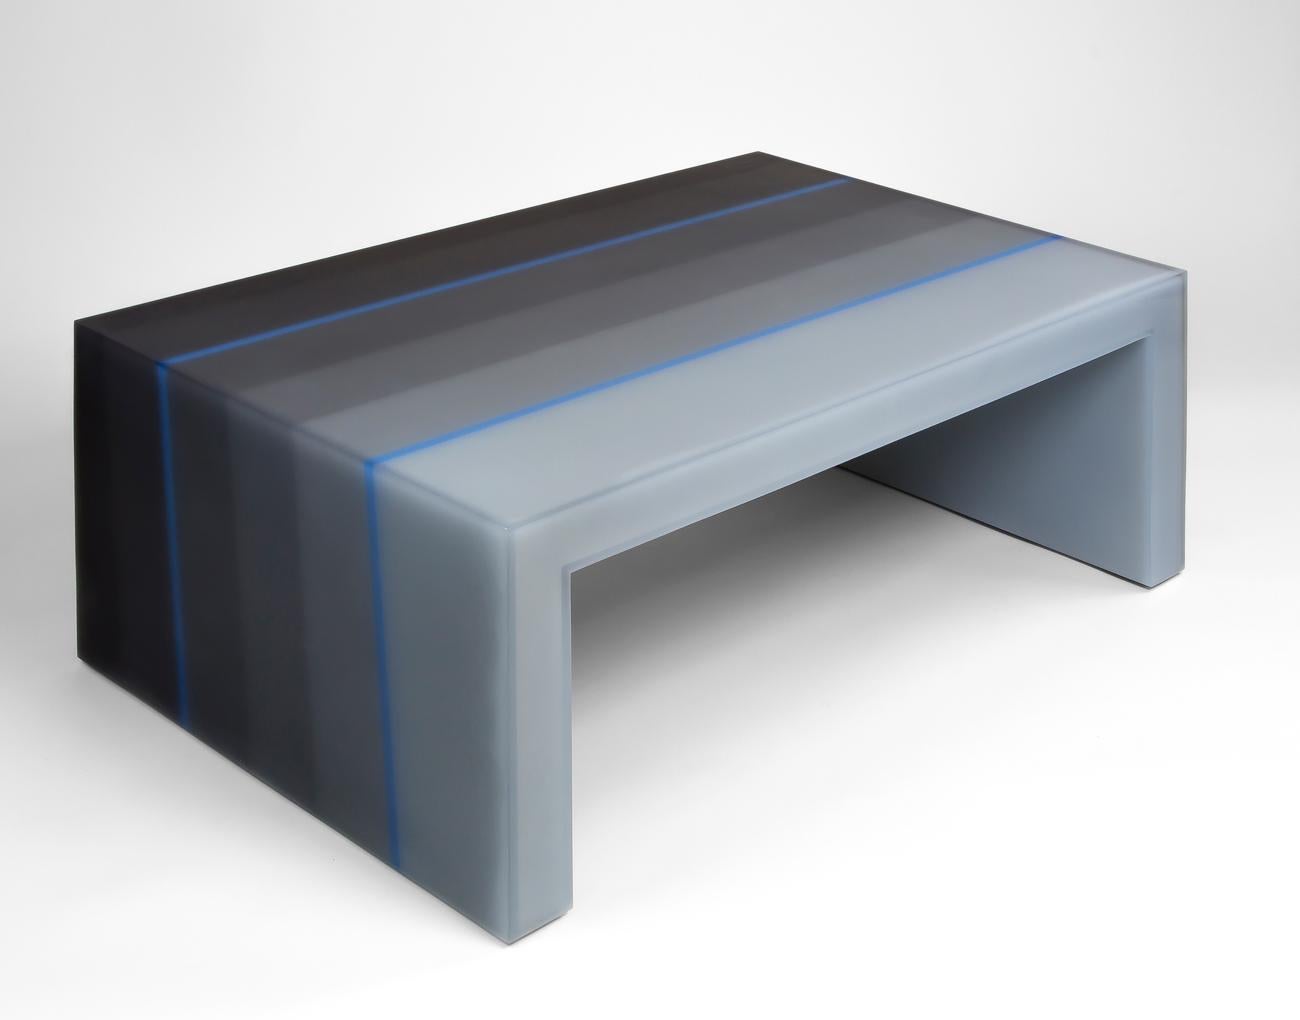 This resin coffee table, infused with soothing shades of grey, is meticulously crafted in six parallel sections by furniture designer Facture Studio. The color makes a gradual ascent from a gradient light to dark from one layer to the next, creating